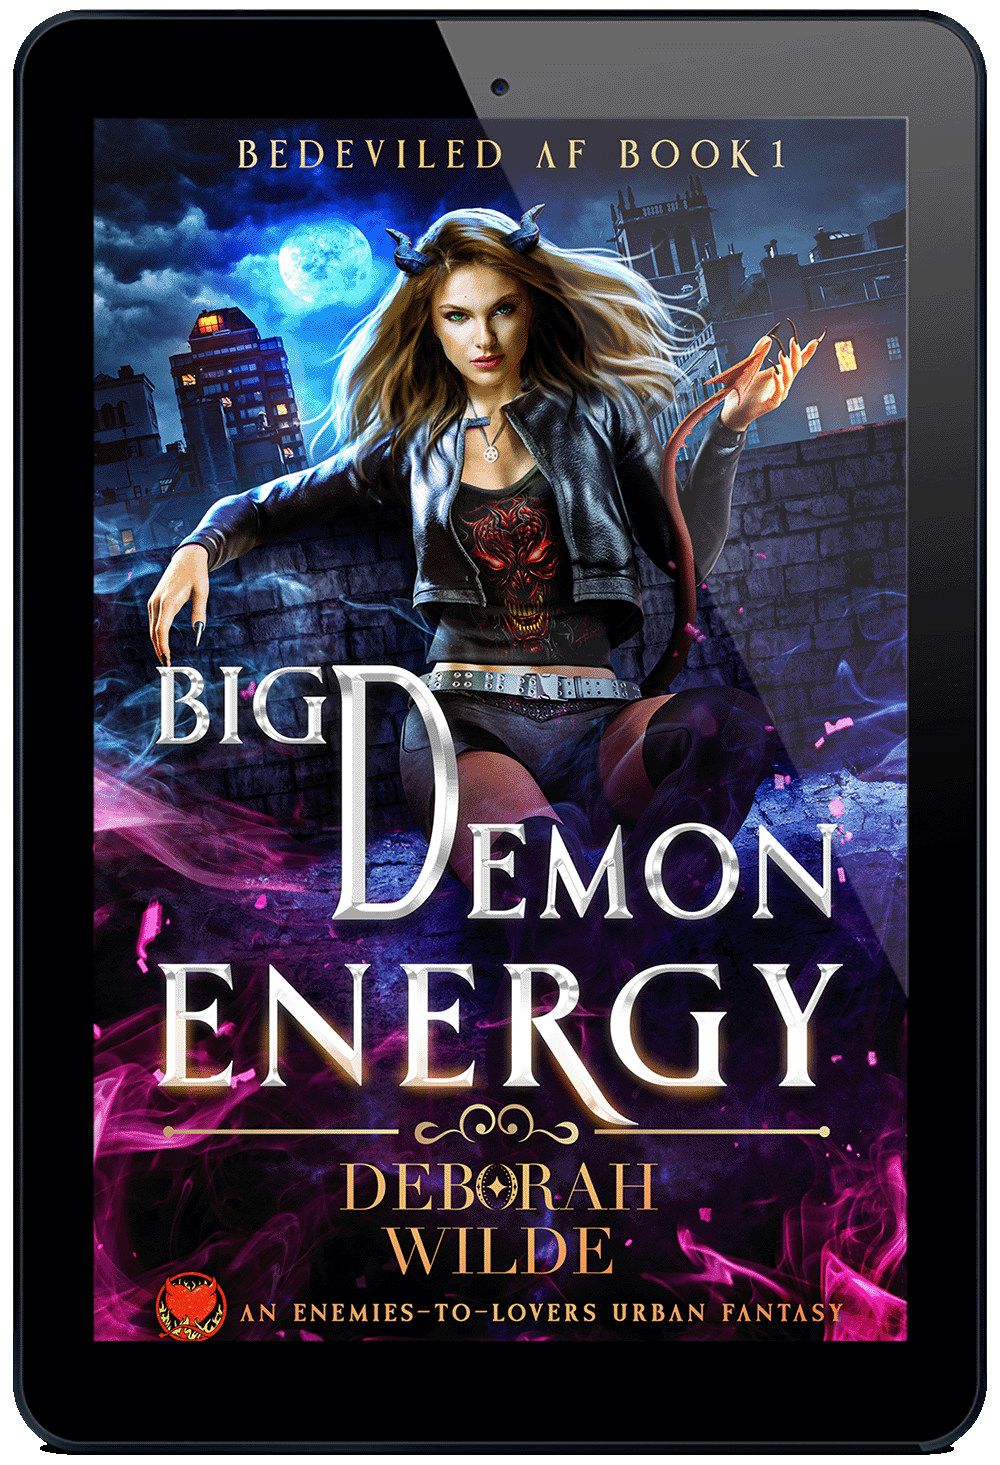 Aviva has to use and fight against her Big D Energy in this new enemies to lovers urban fantasy by Deborah Wilde.